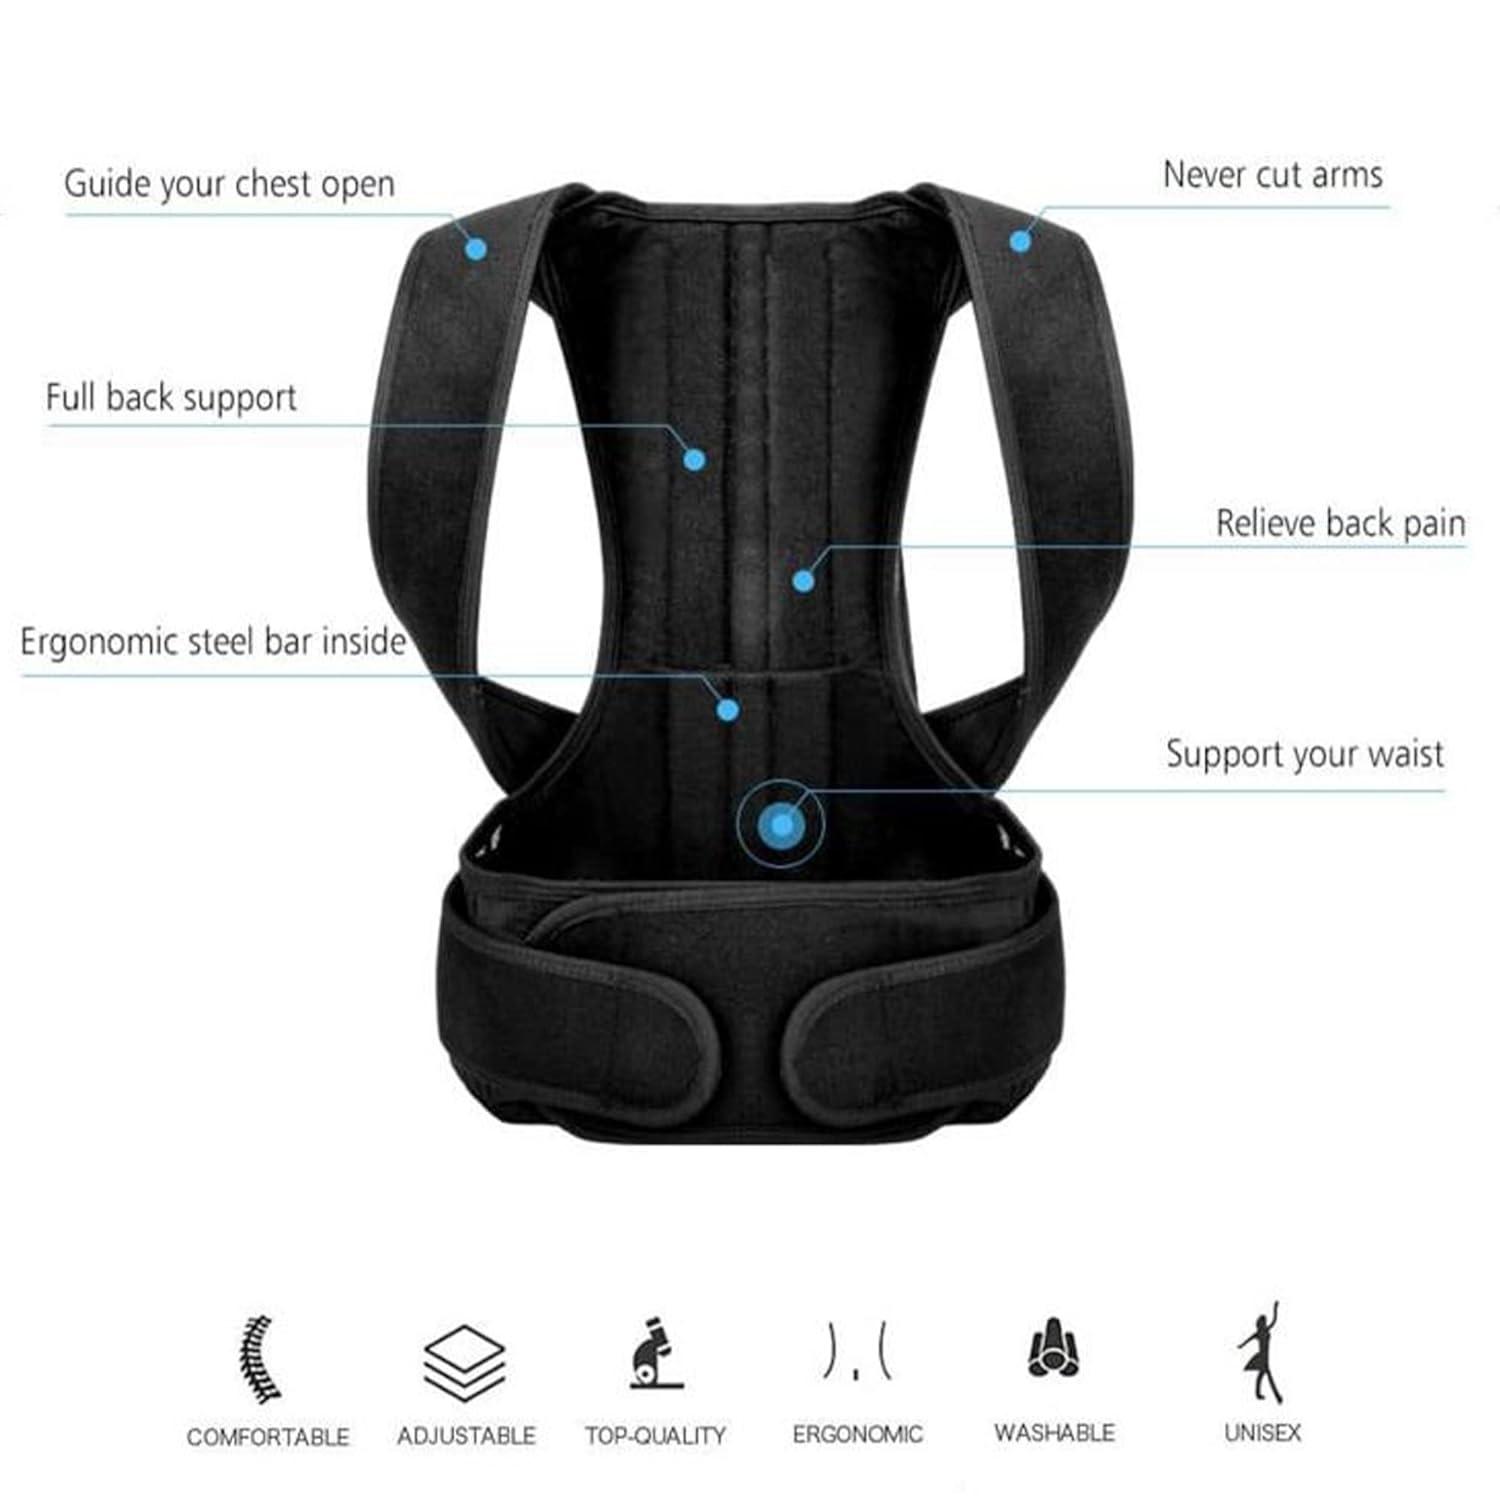 Back Pain Relief,Posture Corrector for Women and Men, Unisex Back